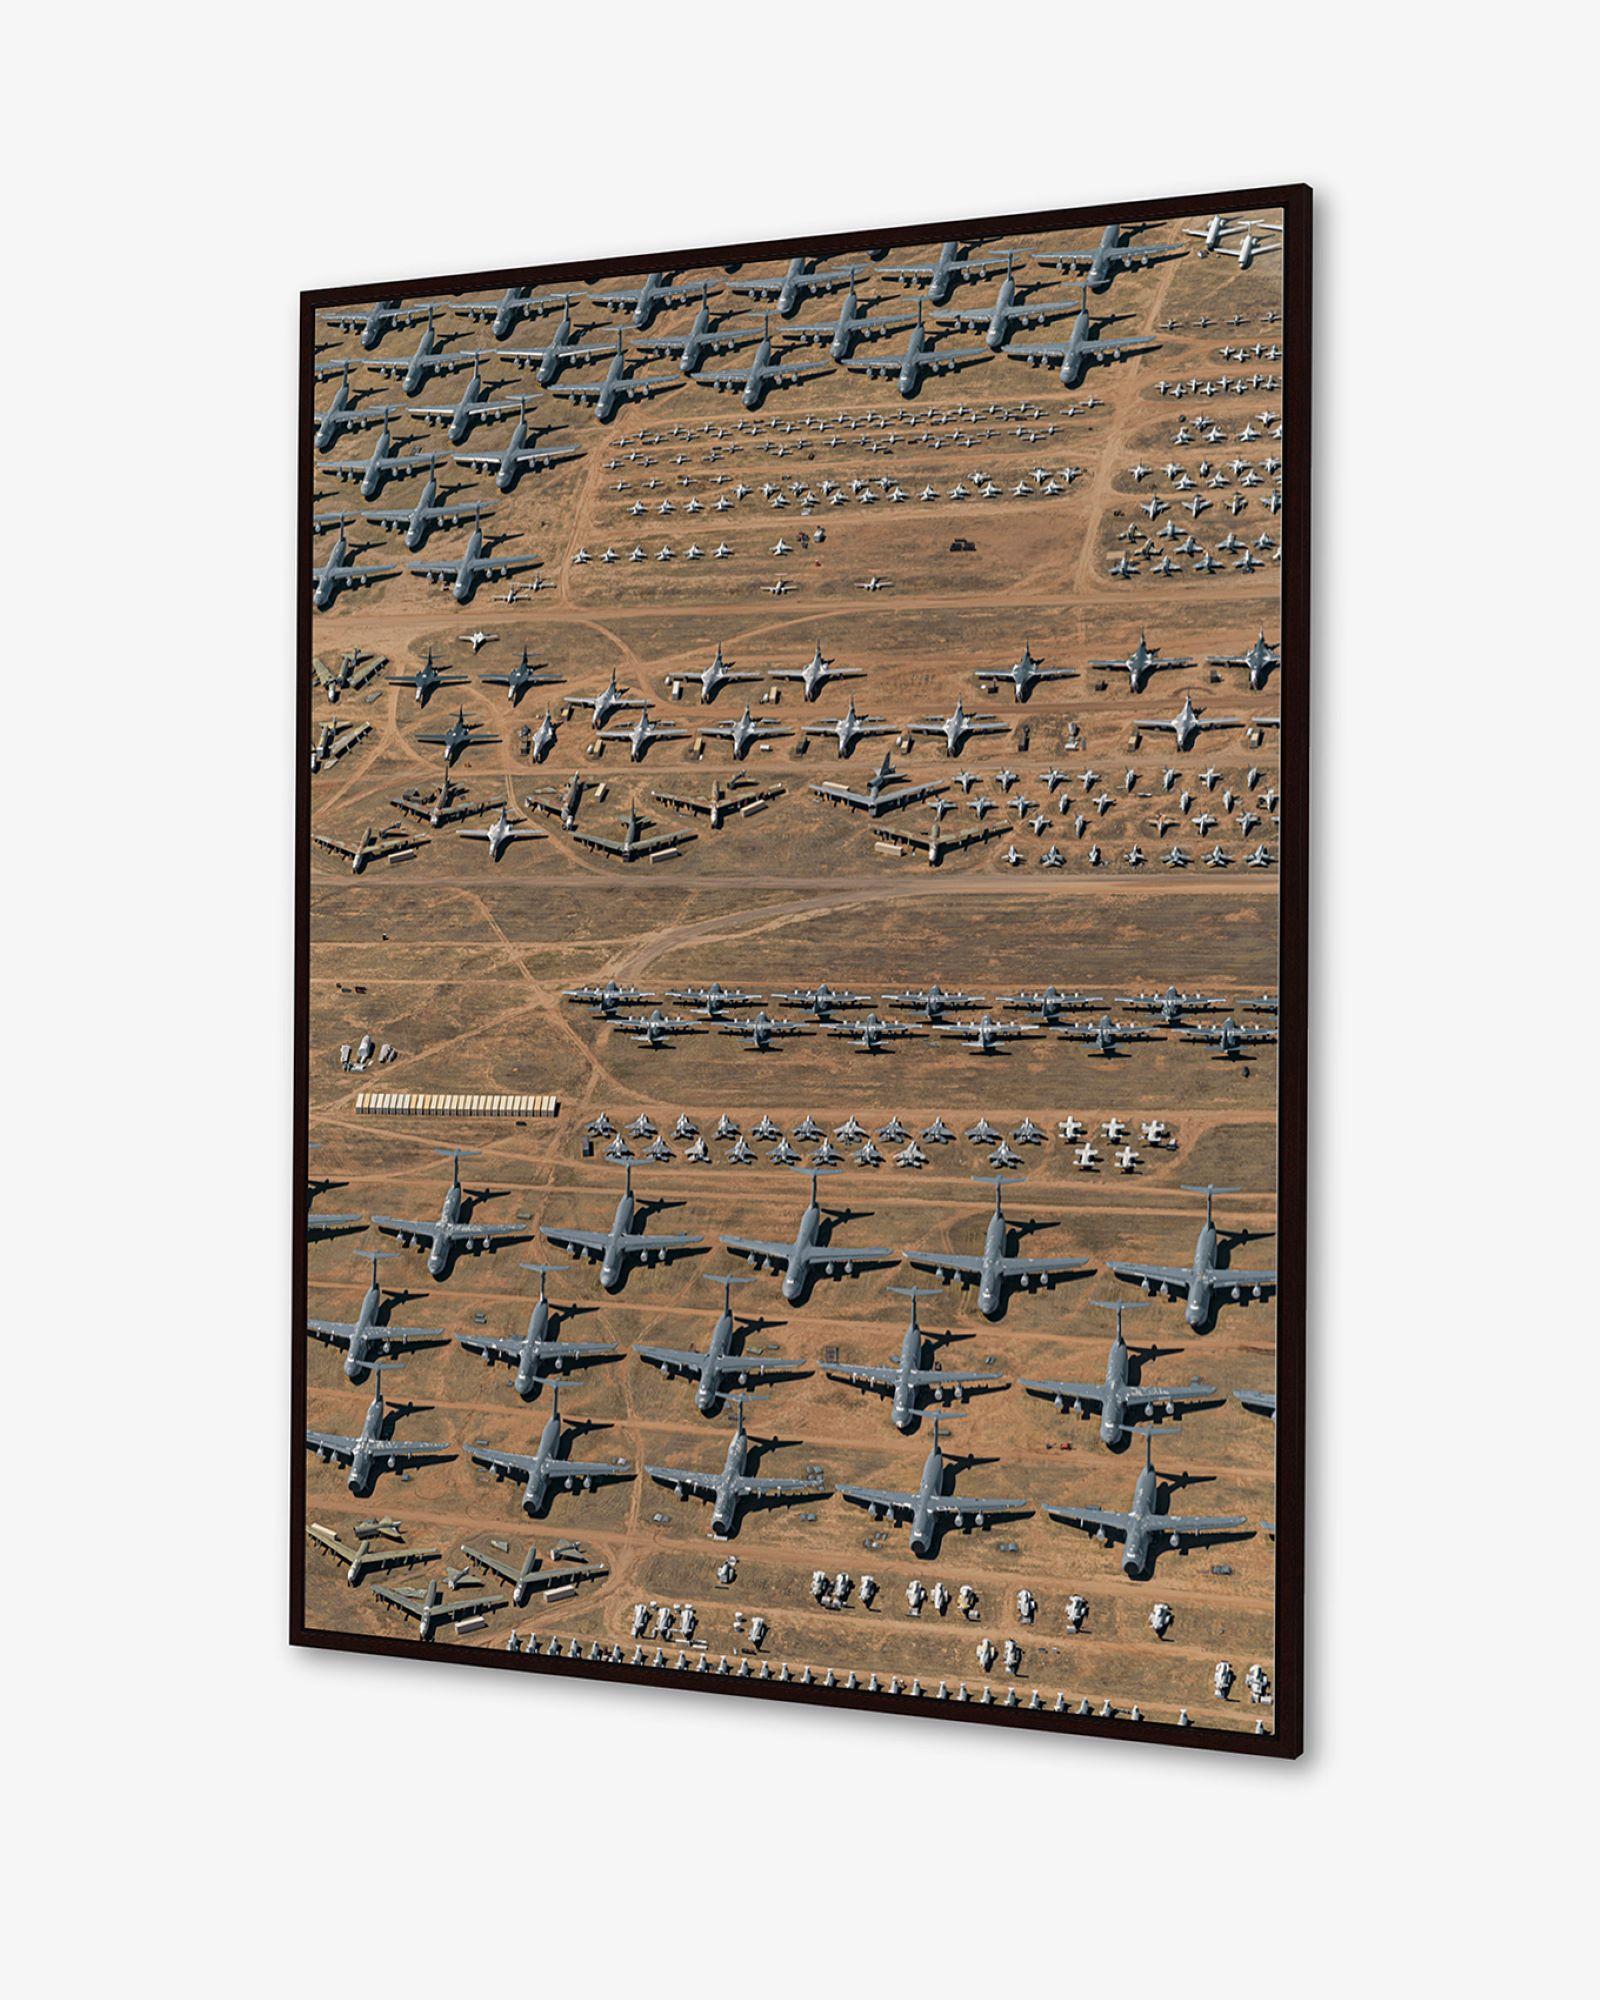 Aerial Views, Boneyard 004 by Bernhard Lang - Aerial photography, planes For Sale 3